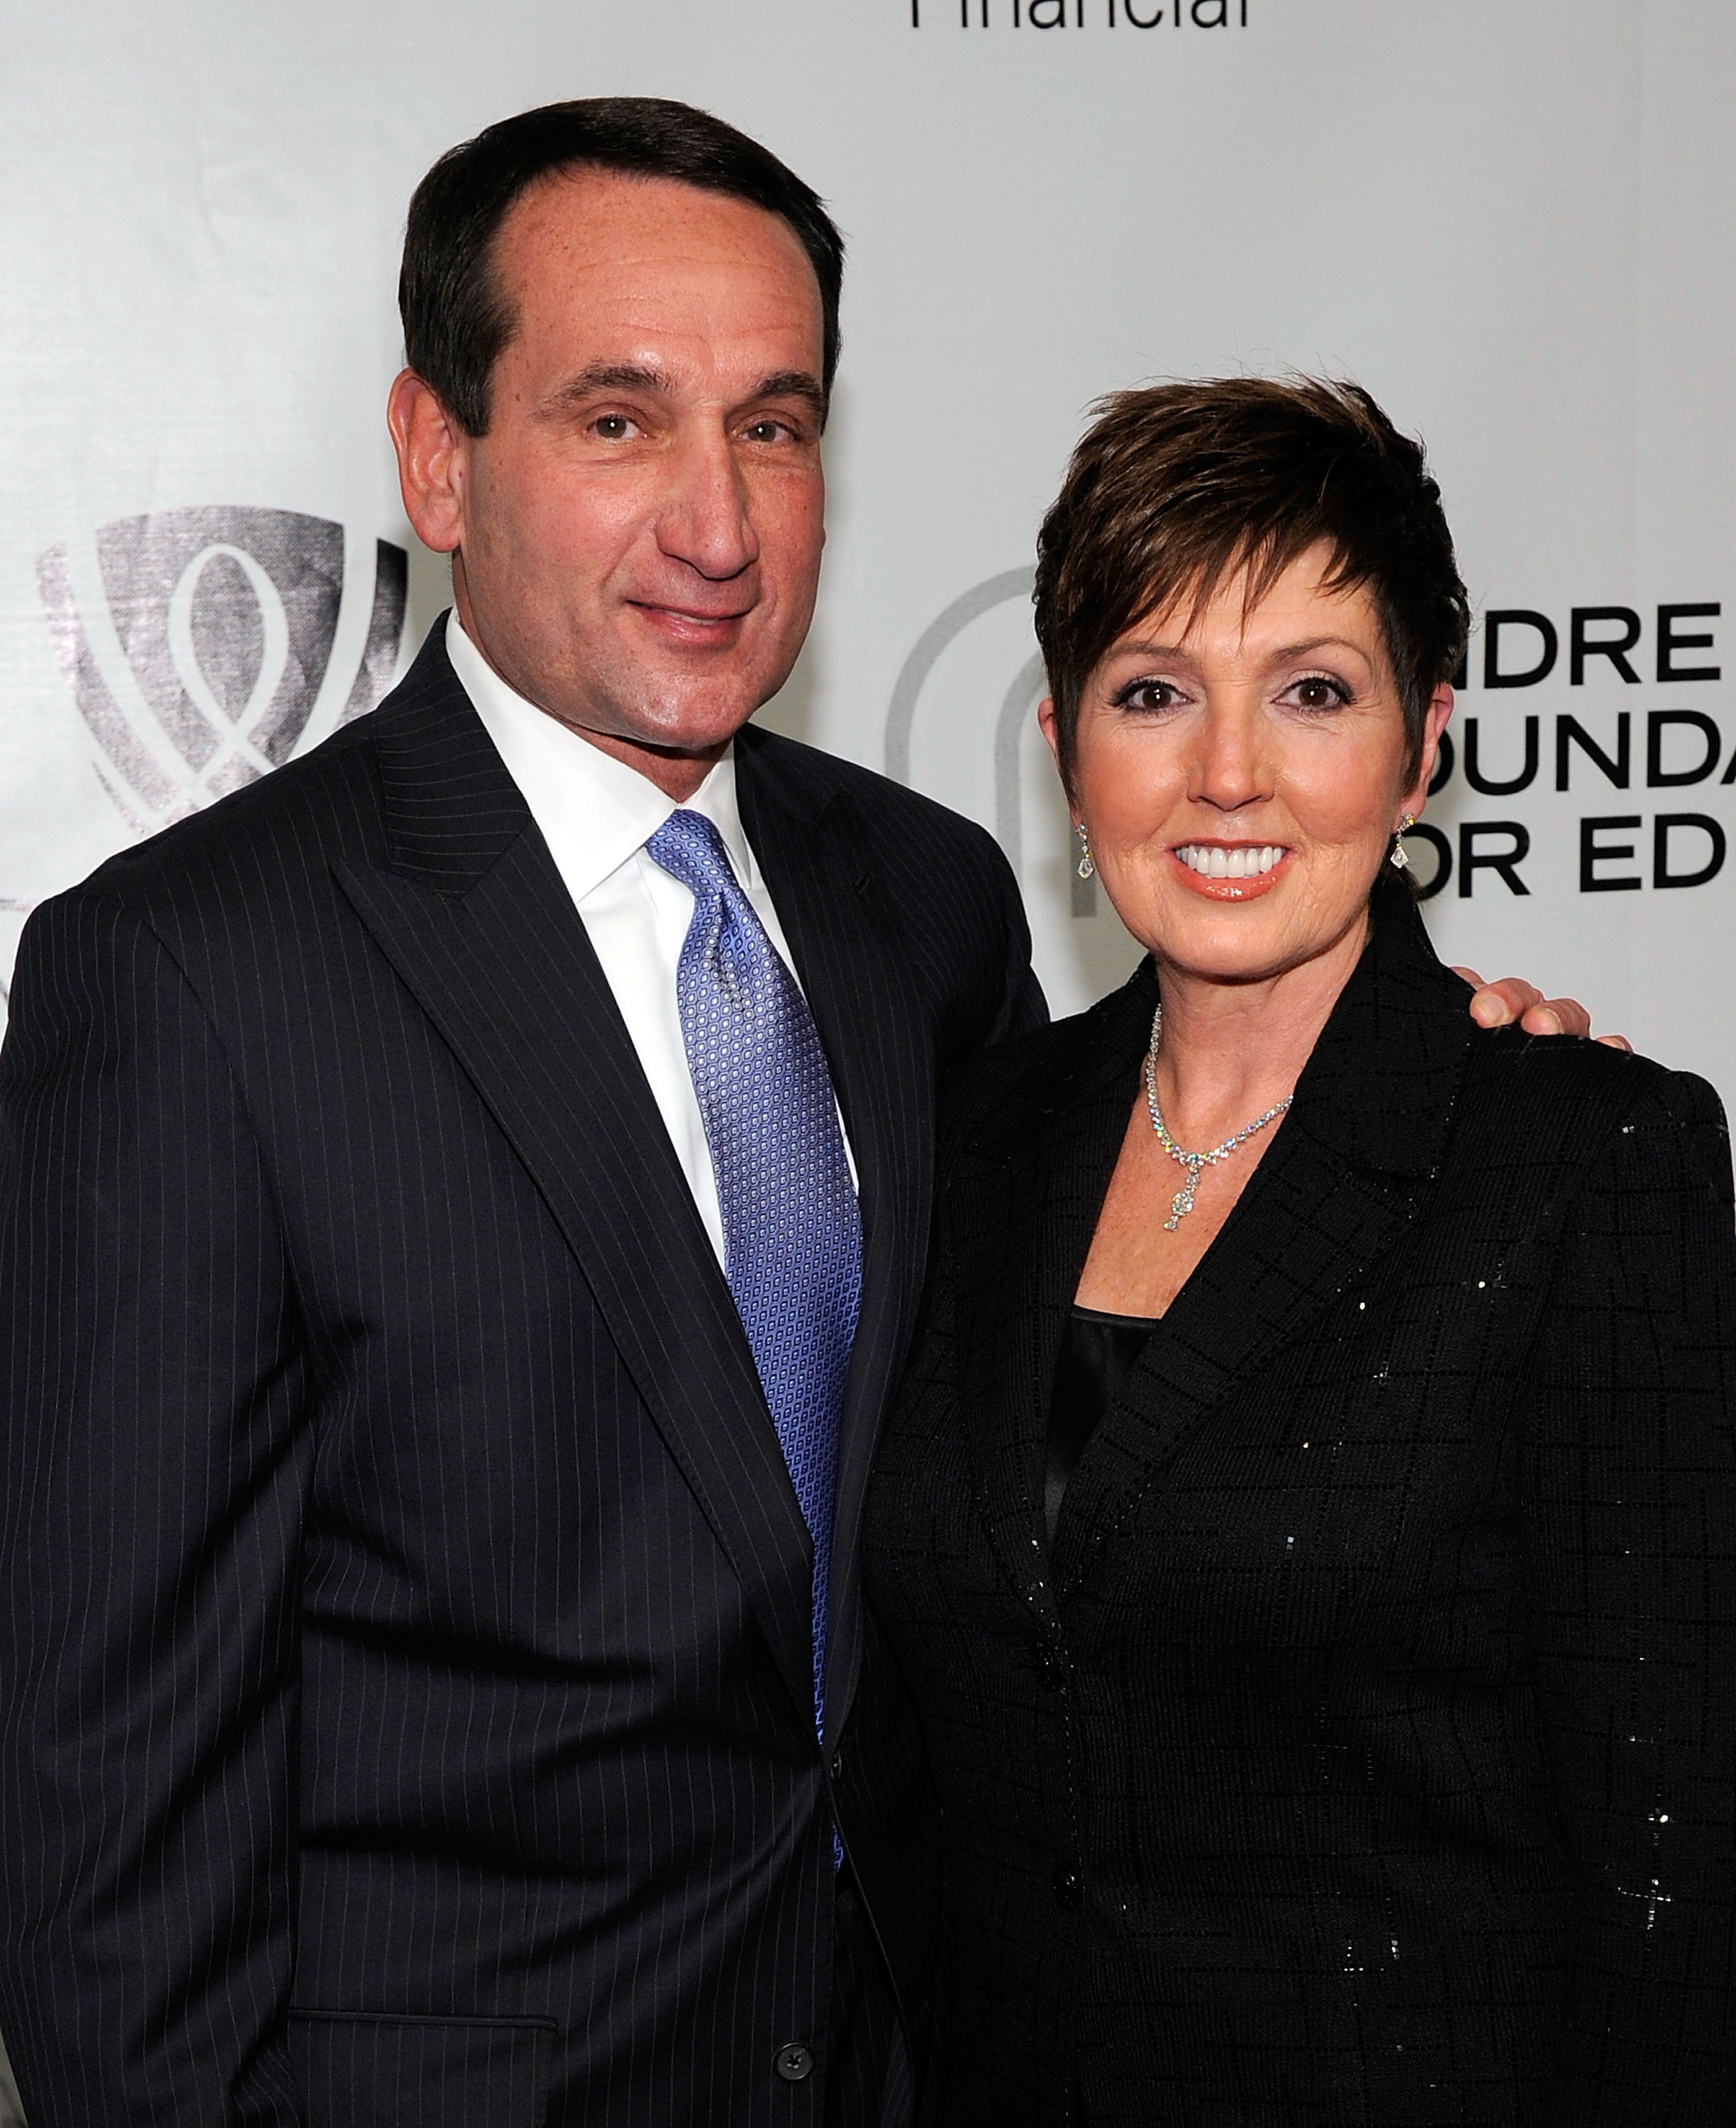 LAS VEGAS - OCTOBER 09:  Duke University head basketball coach Mike Krzyzewski (L) and his wife Carol 'Mickie' Marsh arrive at the Andre Agassi Foundation for Education's 15th Grand Slam for Children benefit concert at the Wynn Las Vegas October 9, 2010 i